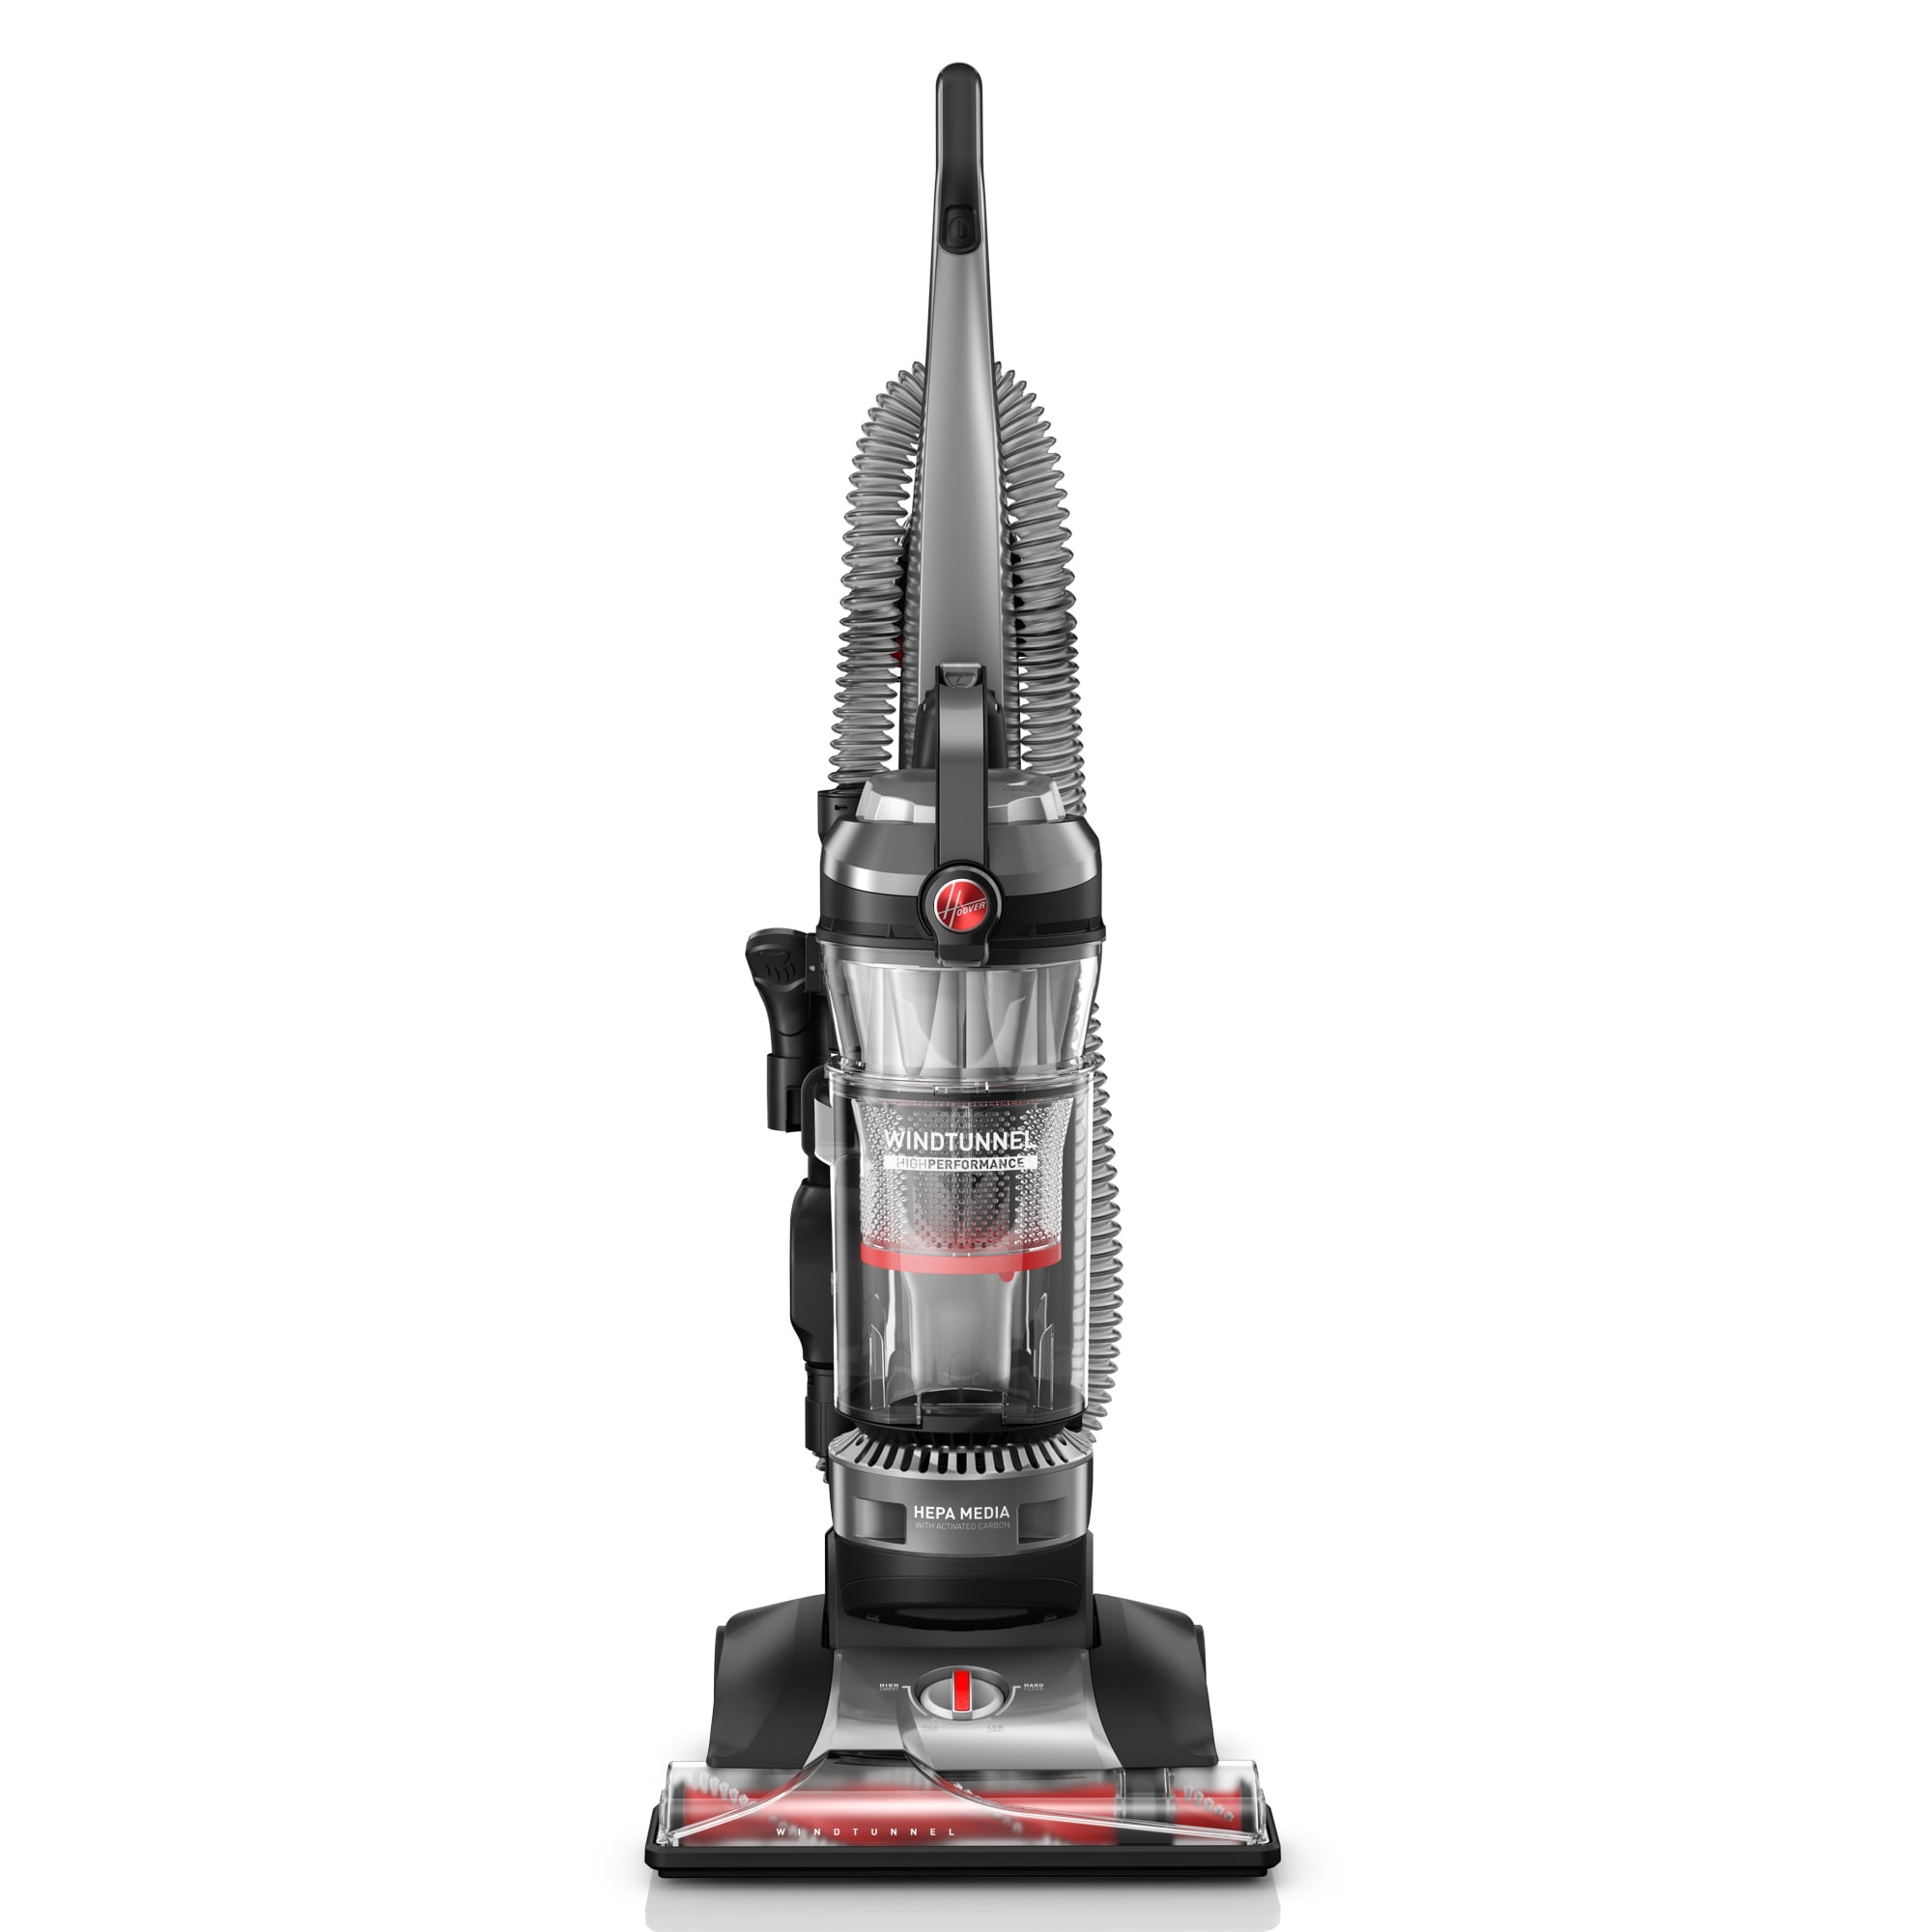 Hoover WindTunnel High-Performance Pet Bagless Upright Vacuum Cleaner, UH72601